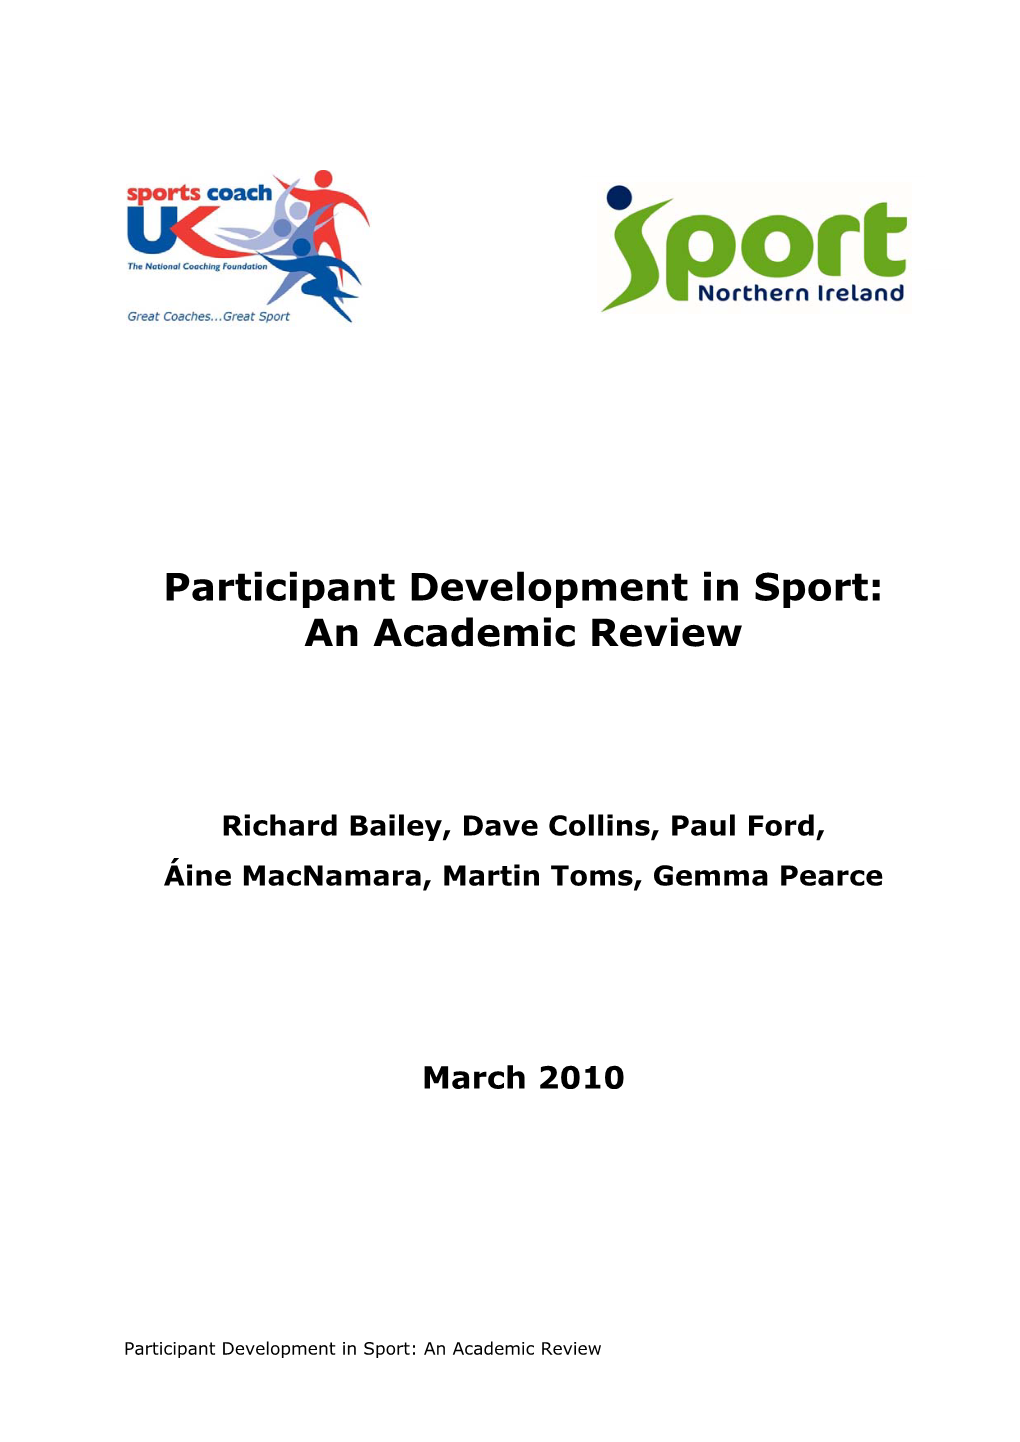 Participant Development in Sport: an Academic Review